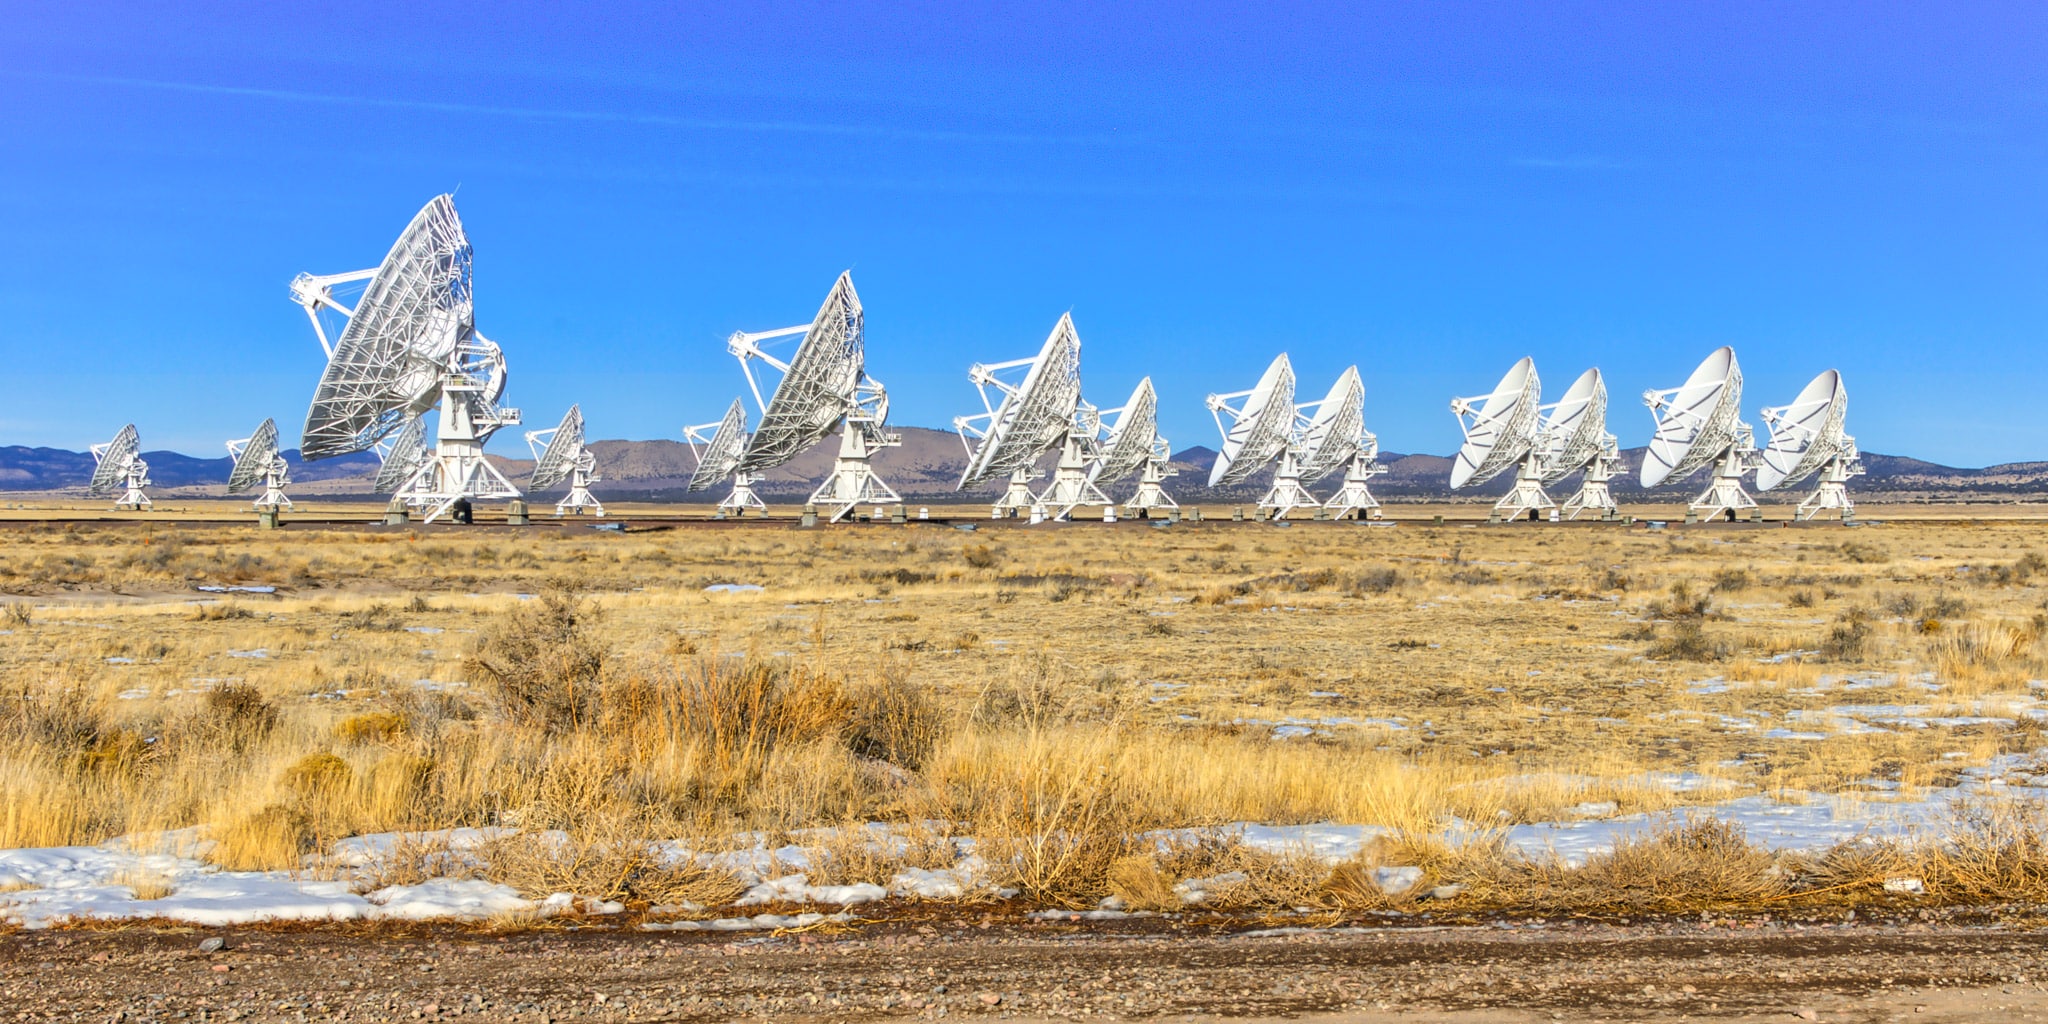 Back end of one of the radio telescopes of the Very Large Array radio observatory, west of Socorro, New Mexico.